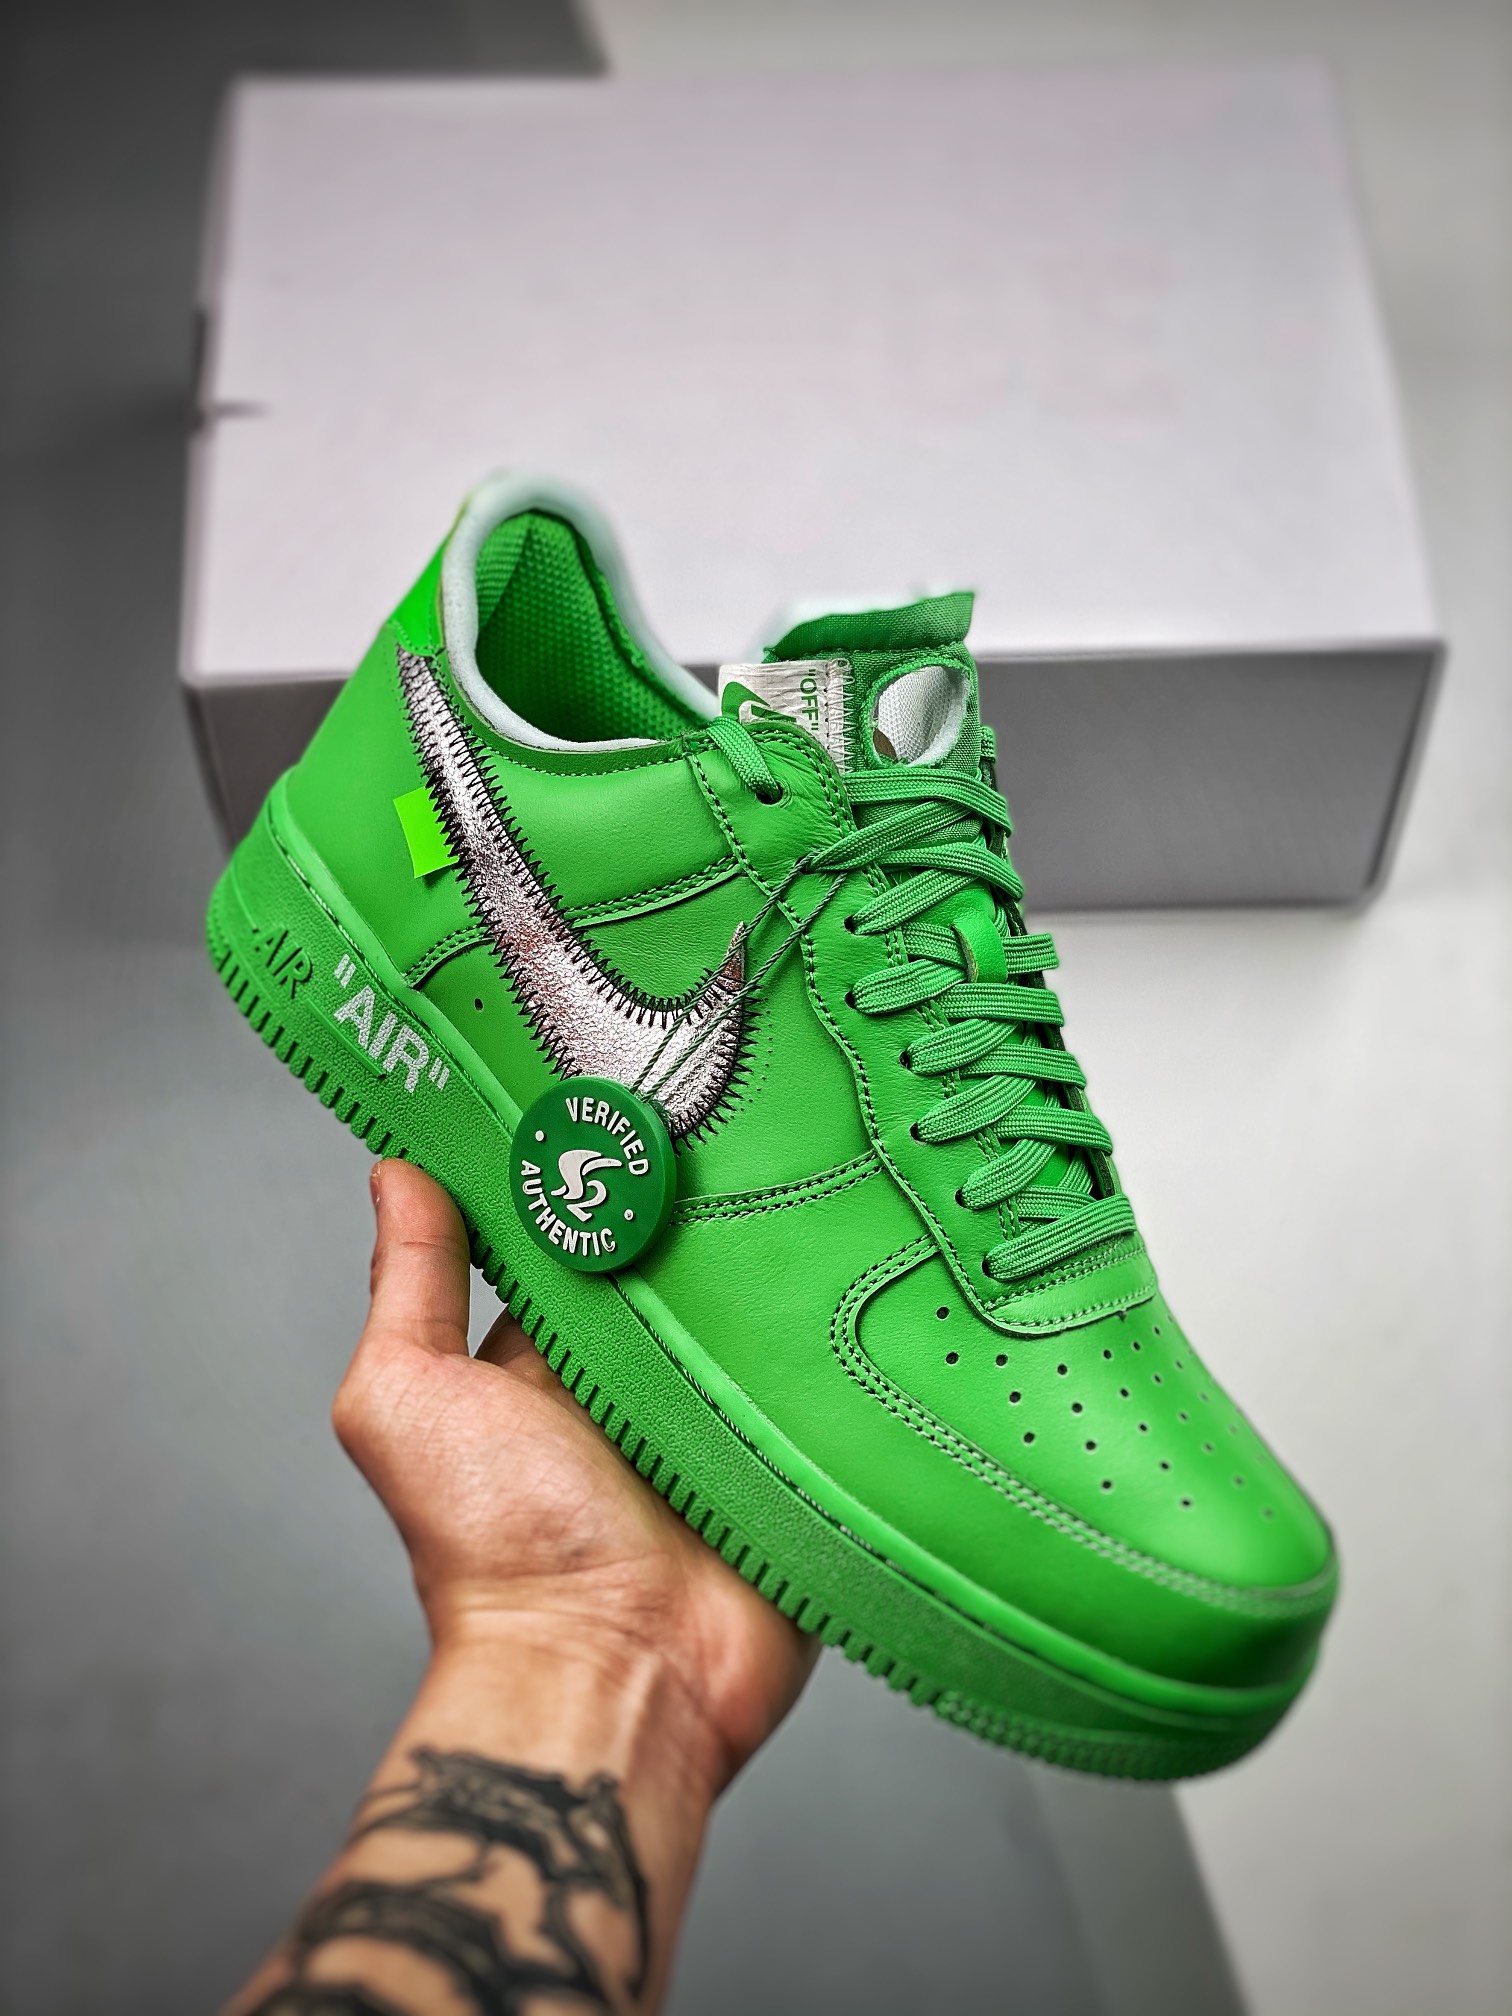 Off-White x Air Force 1 Low 'Light Green Spark' - DX1419 300